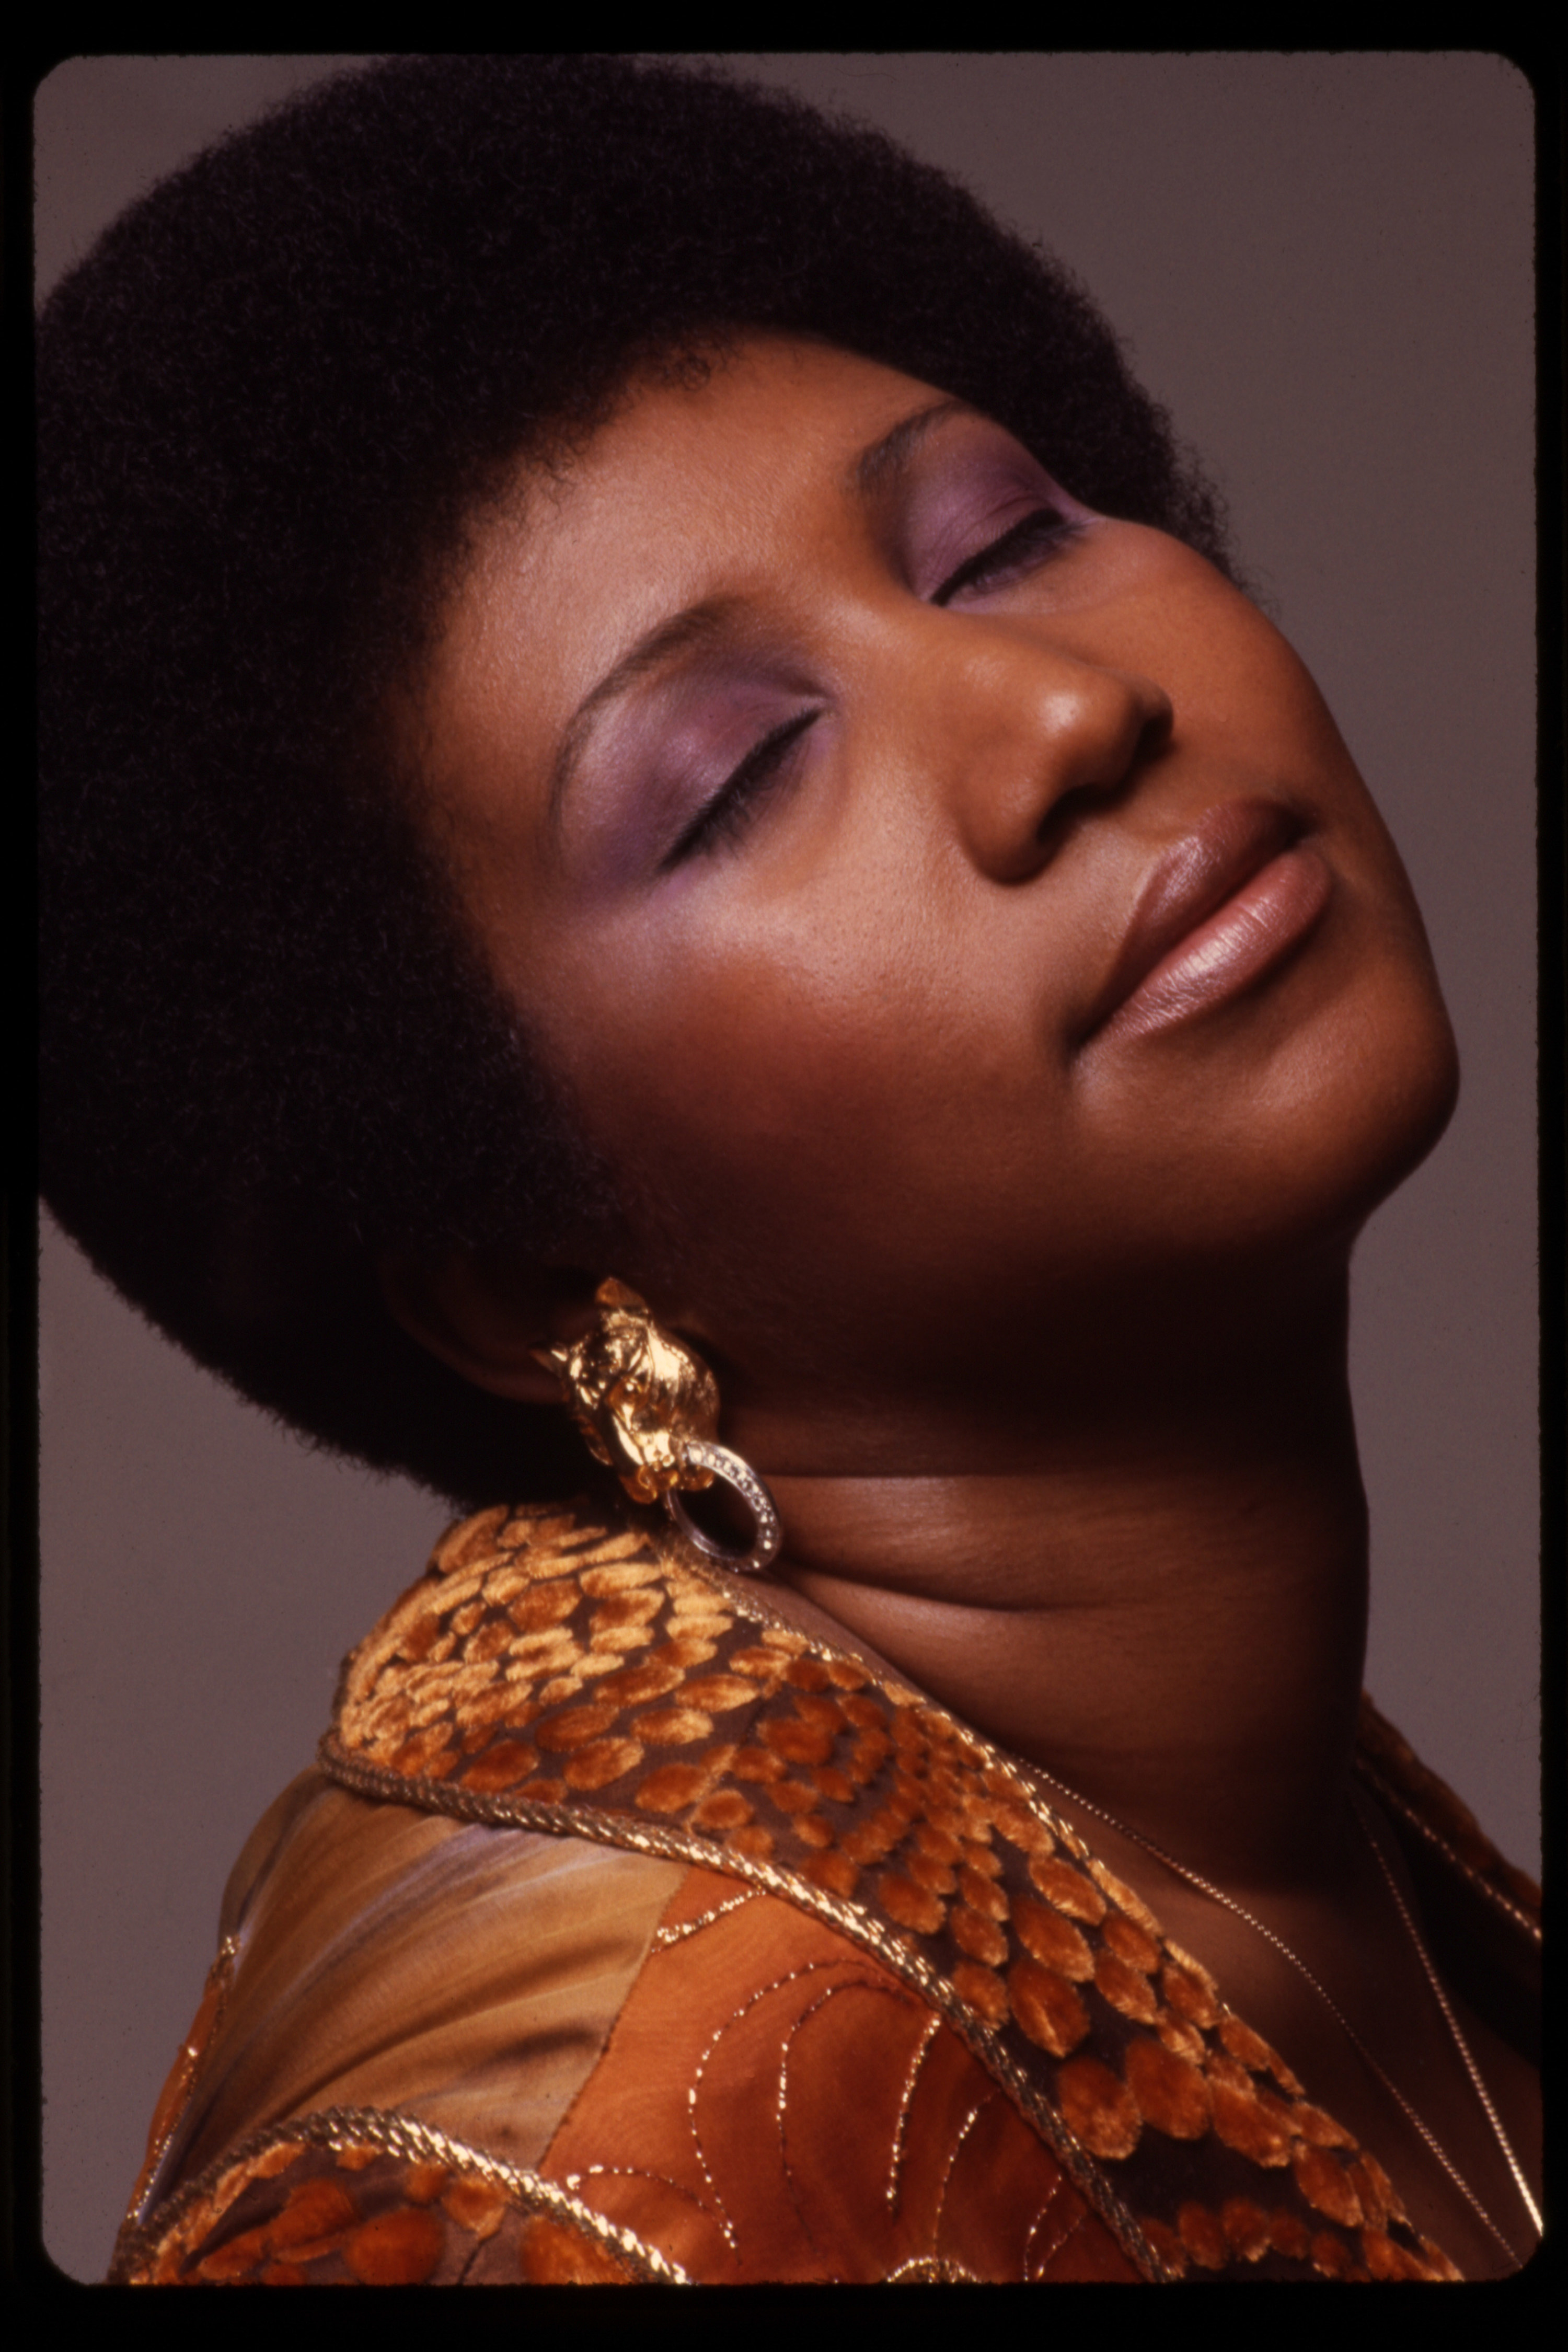 A close-up portrait of Aretha Franklin with her head tilted back 